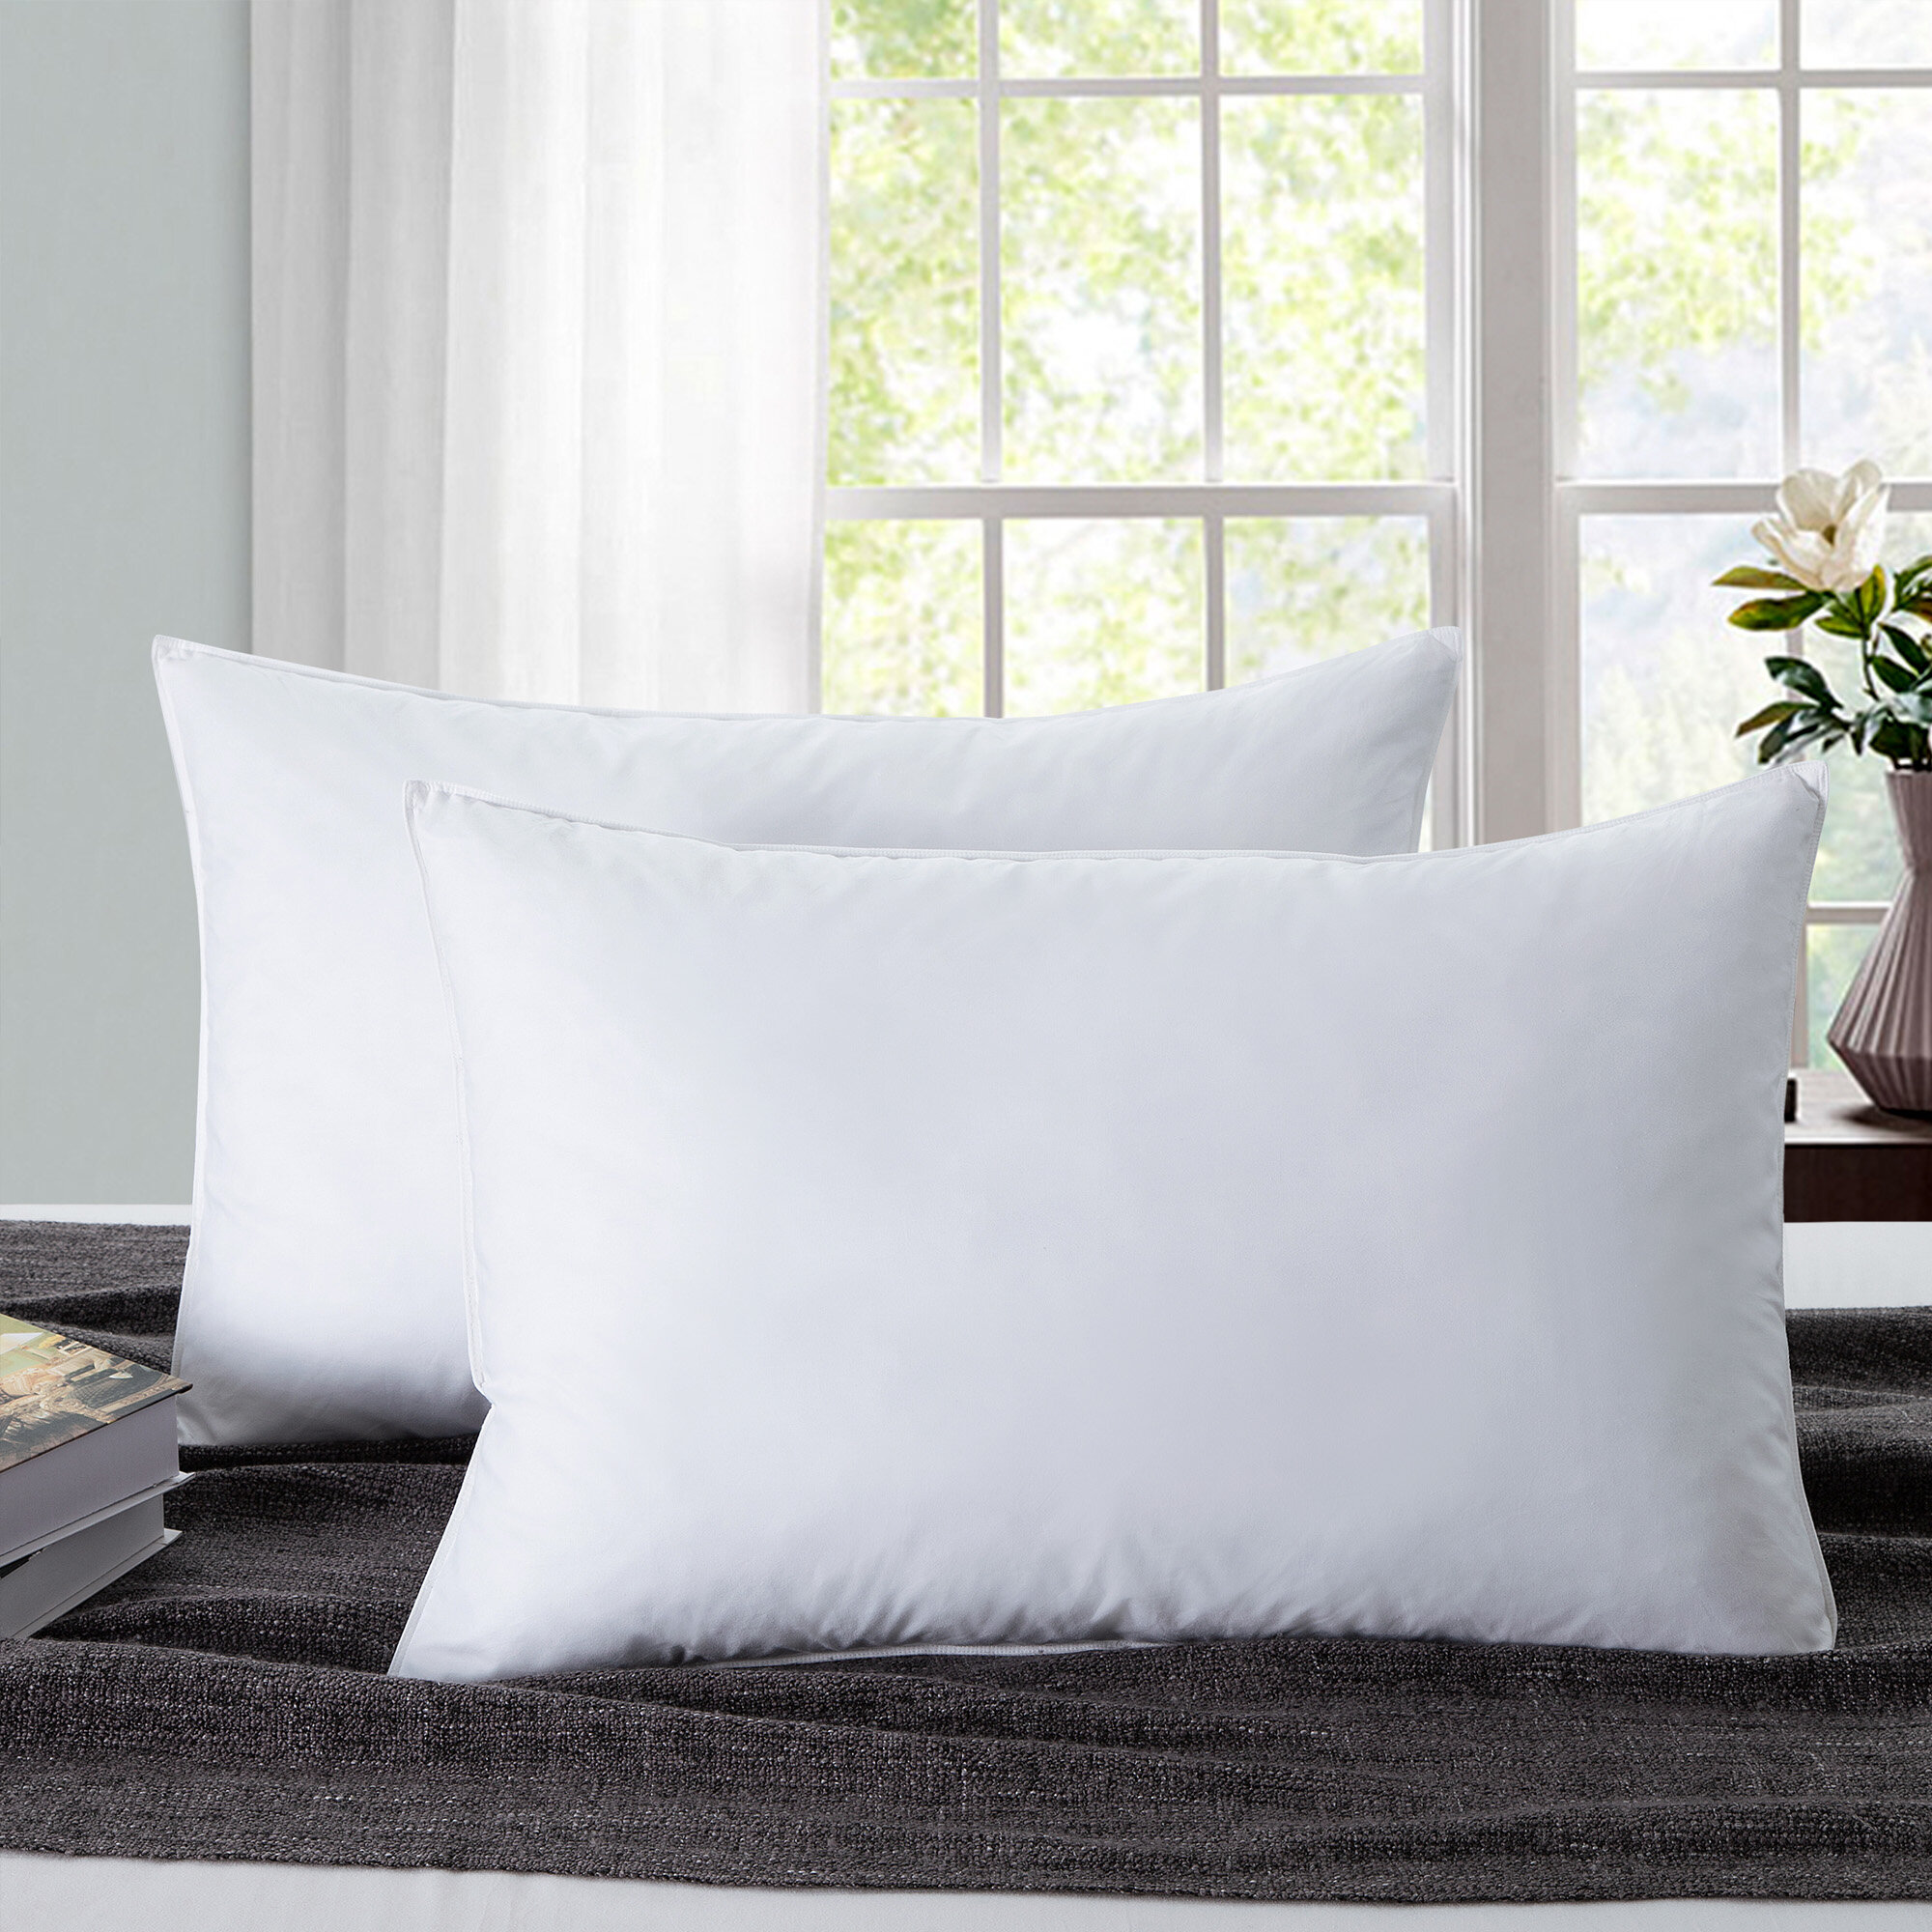 Pacific Coast Feather Dreamy Nights Grand Impression Firm Density White Pillow 